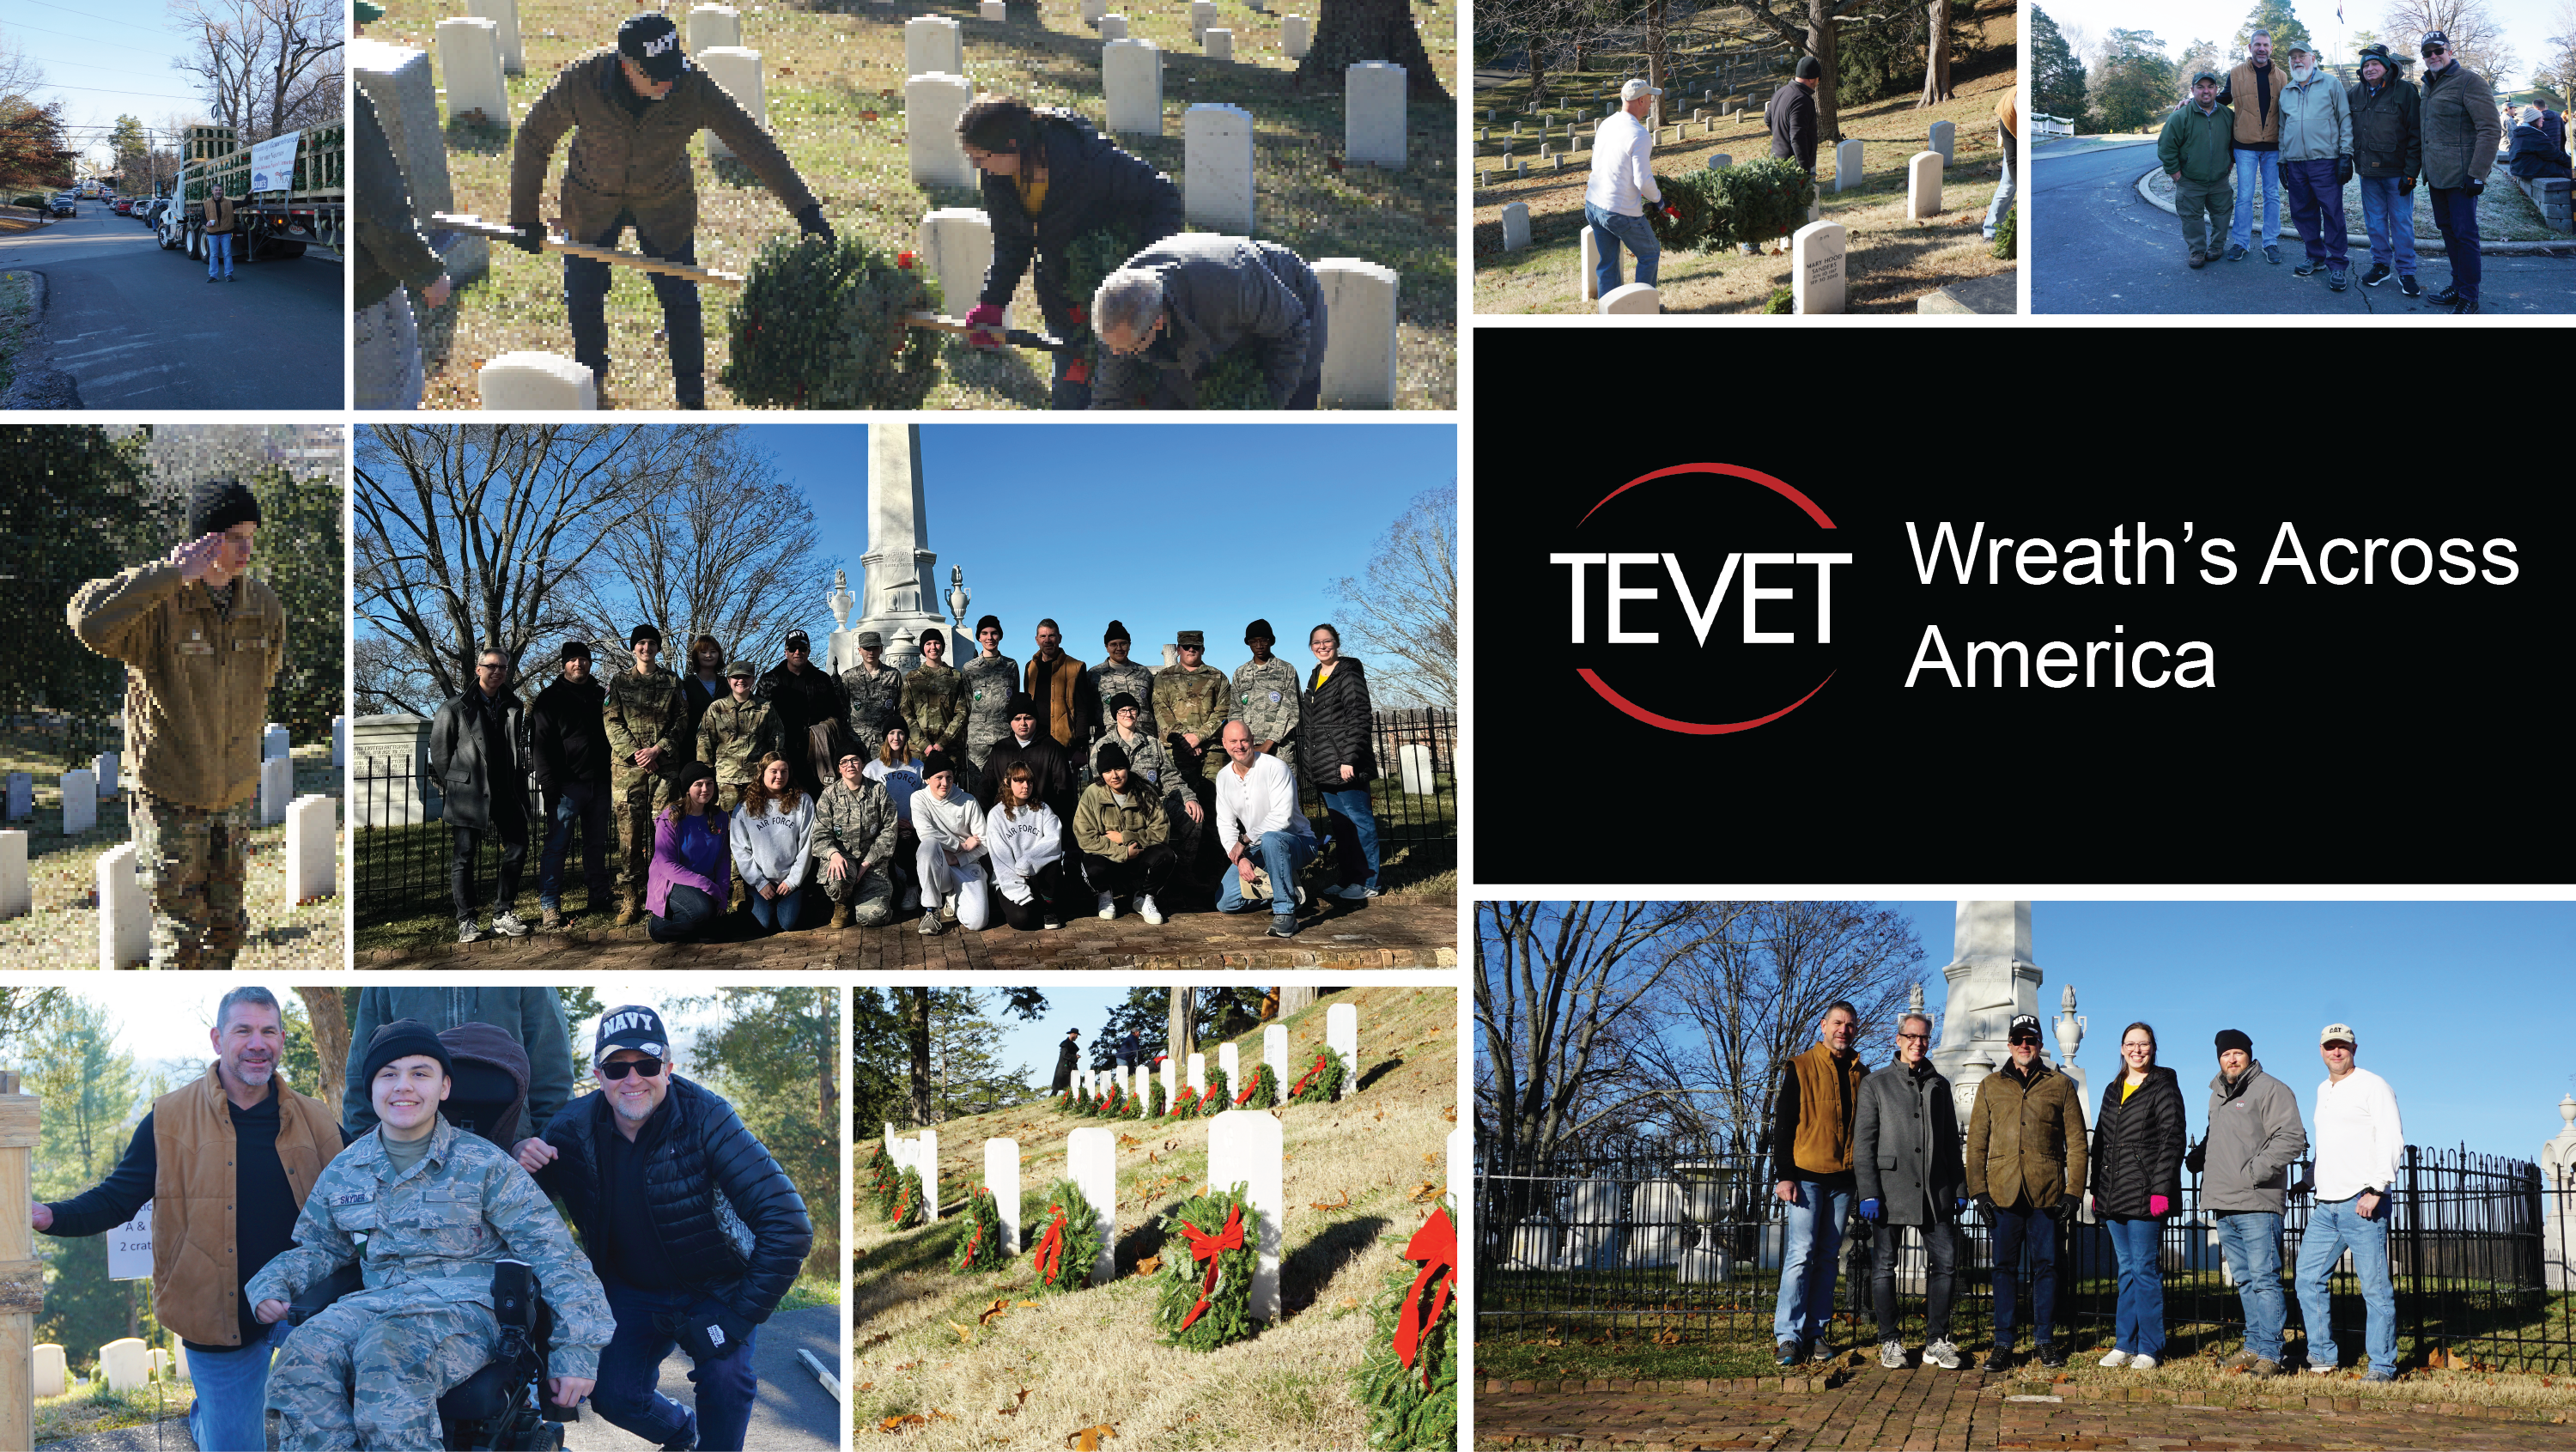 TEVET employees placing wreaths on the graves of fallen soldiers at a local veterans' cemetery. This annual tradition unites volunteers nationwide in honoring the service of our veterans by adorning their resting places with wreaths as a heartfelt tribute.